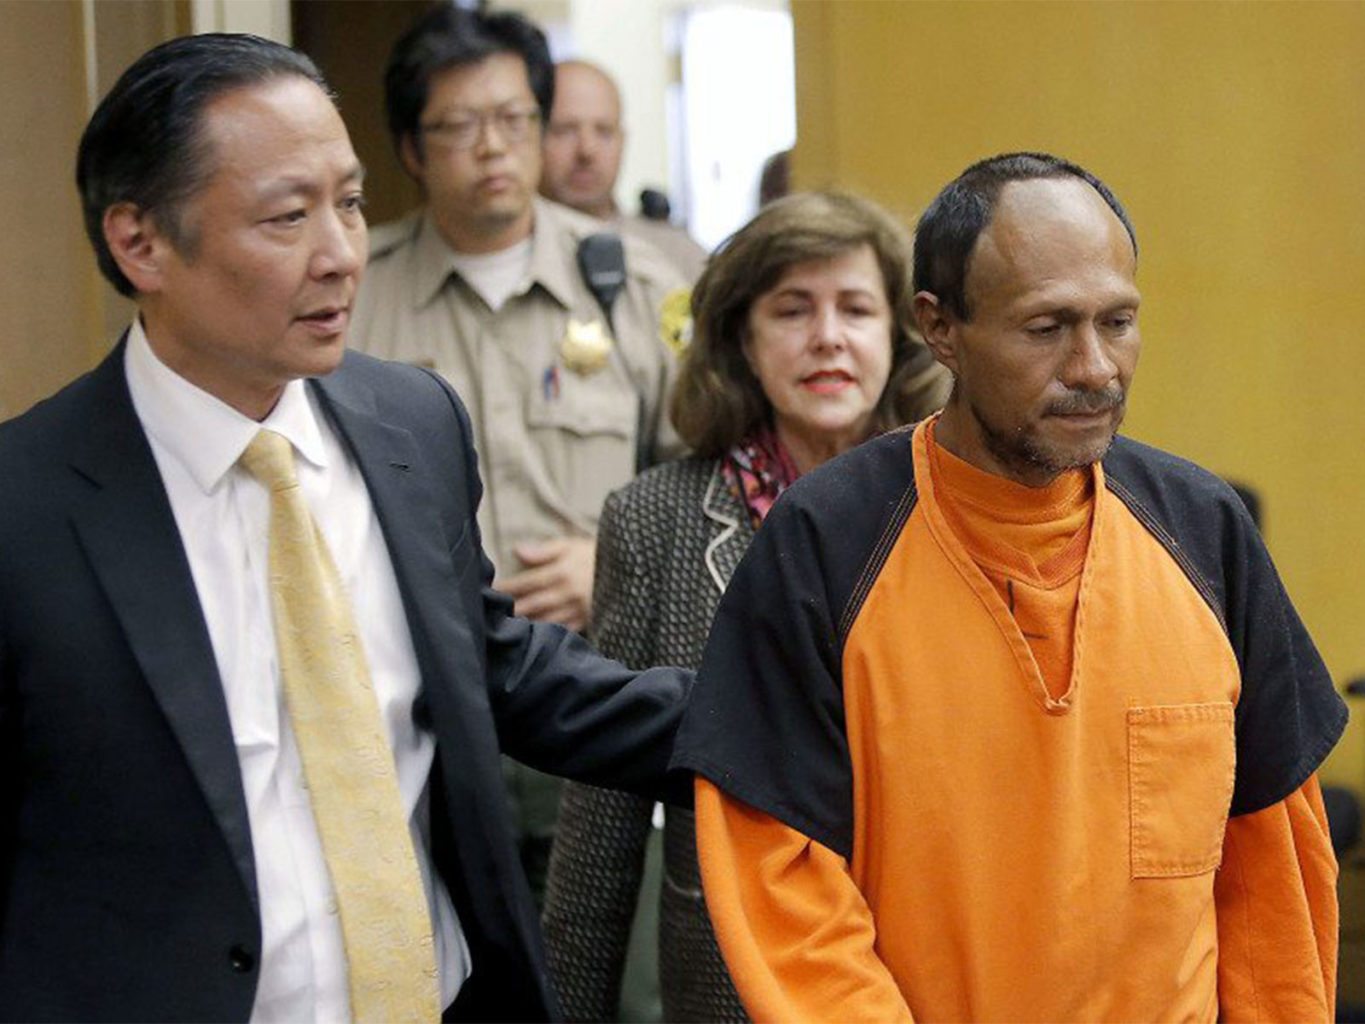 Juan Francisco Lopez Sanchez, right, is lead into the courtroom by San Francisco Public Defender Jeff Adachi, left, and Assistant District Attorney Diana Garciaor for arraignment on July 7, 2015. (Michael Macor/2015 San Francisco Chronicle via Pool)